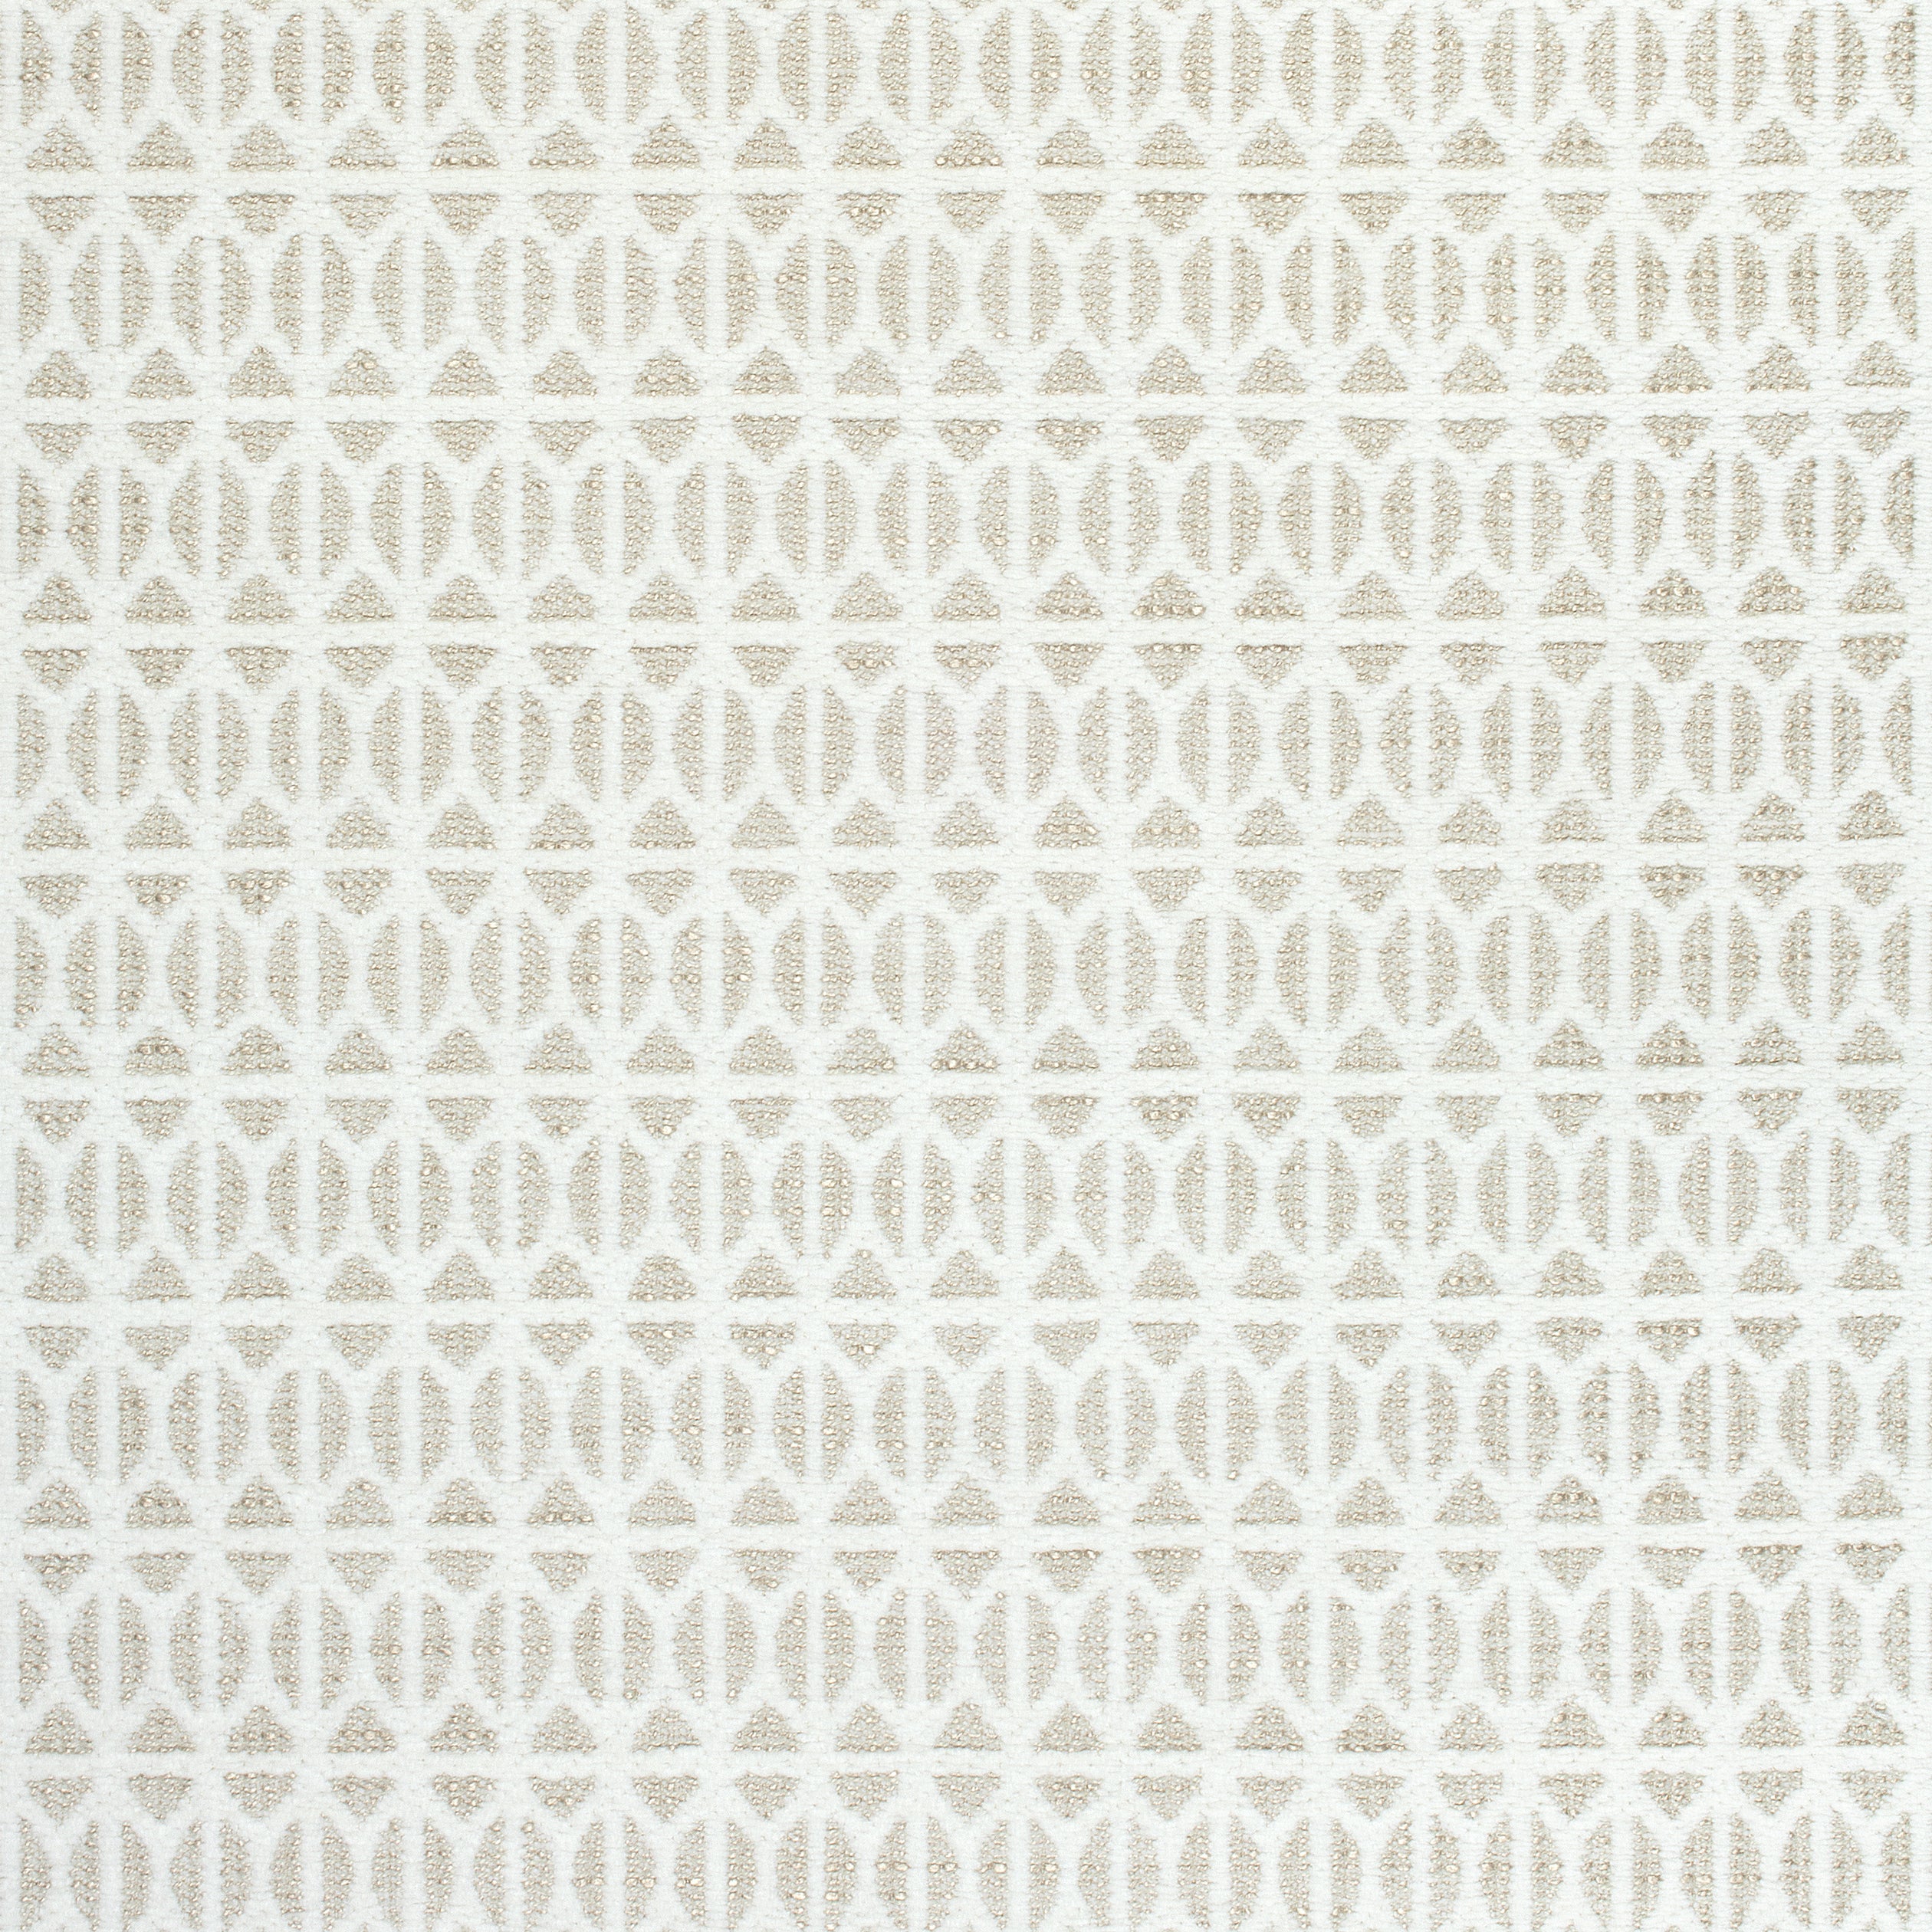 Qunlan fabric in flax color - pattern number W789107 - by Thibaut in the Reverie collection